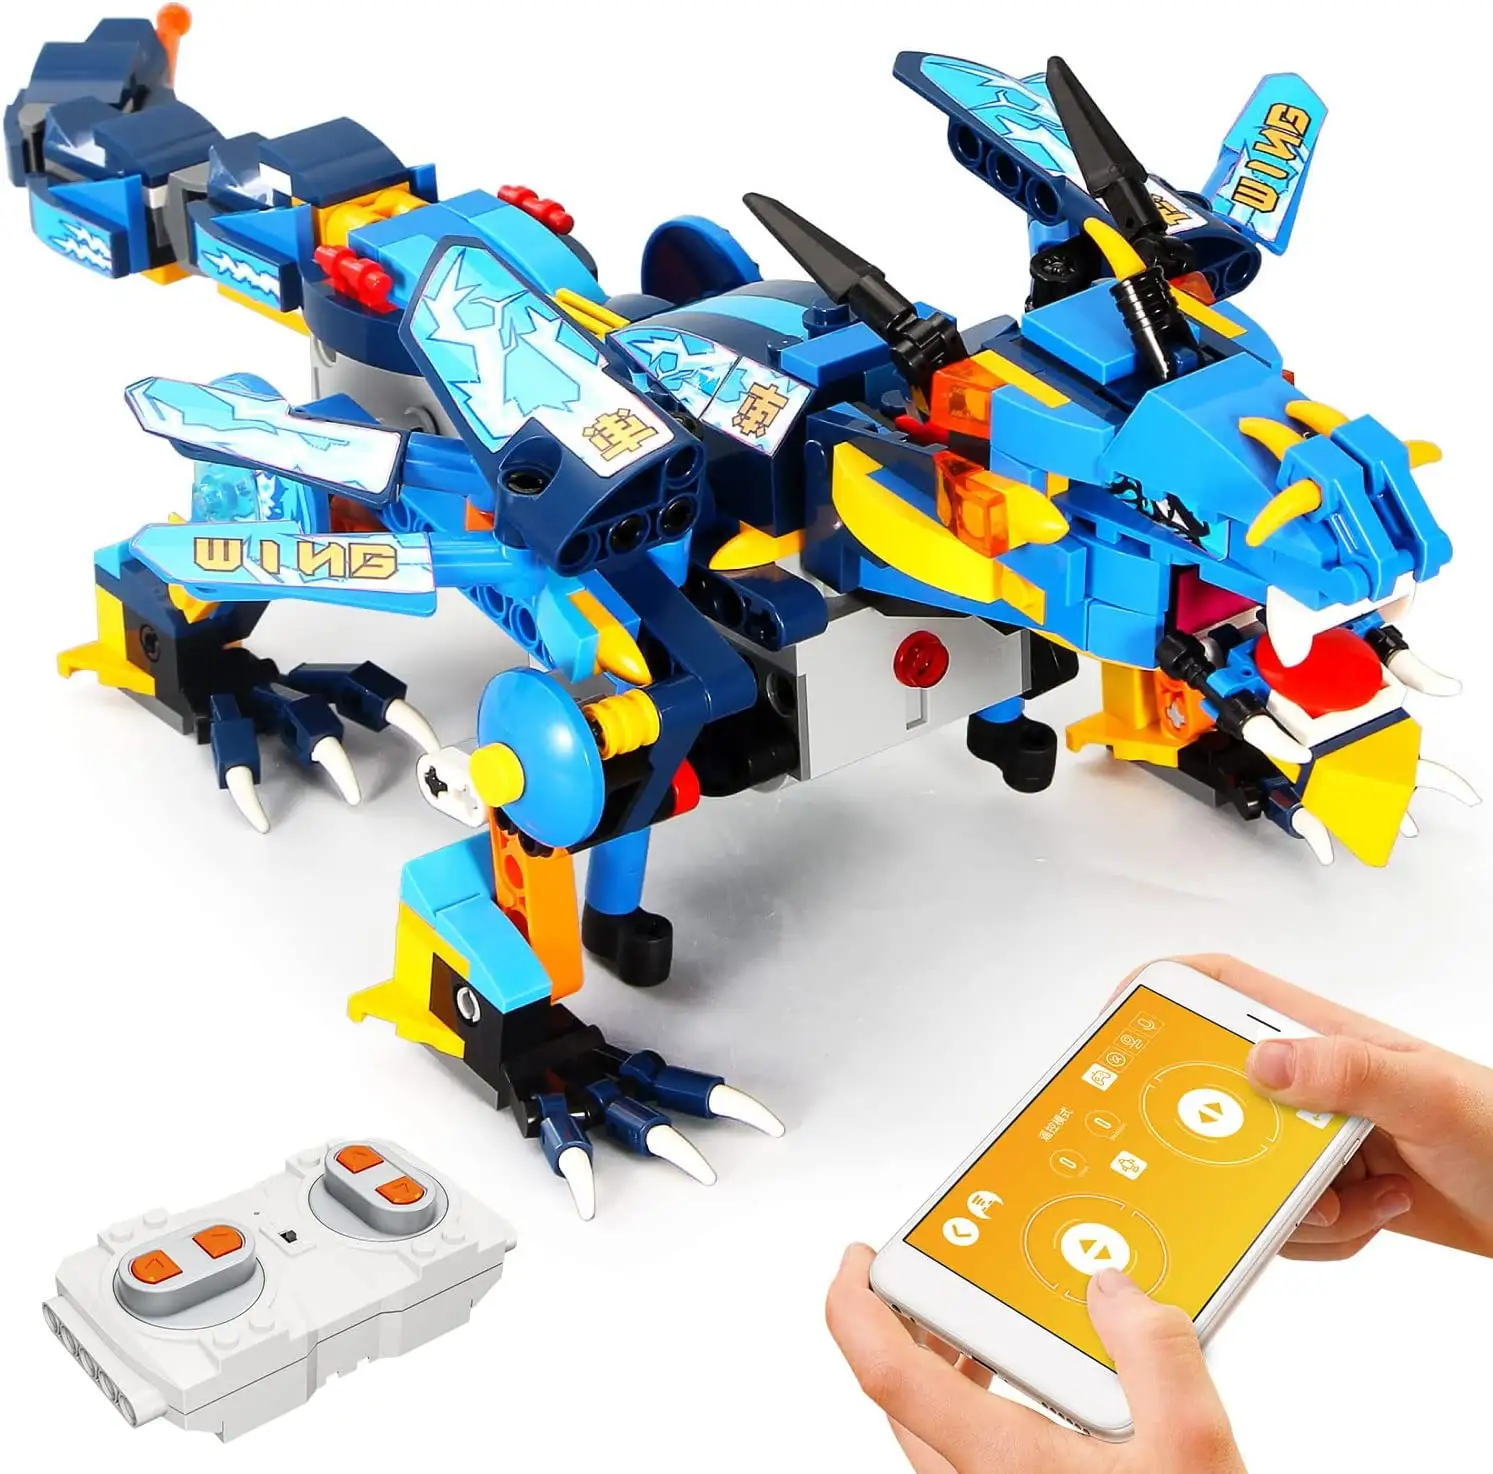 Flytec Dragon Building Blocks Toys 410Pcs with 2.4GHz RC and APP Control DIY Robot Model Best Gifts Toys for Adult and Kids